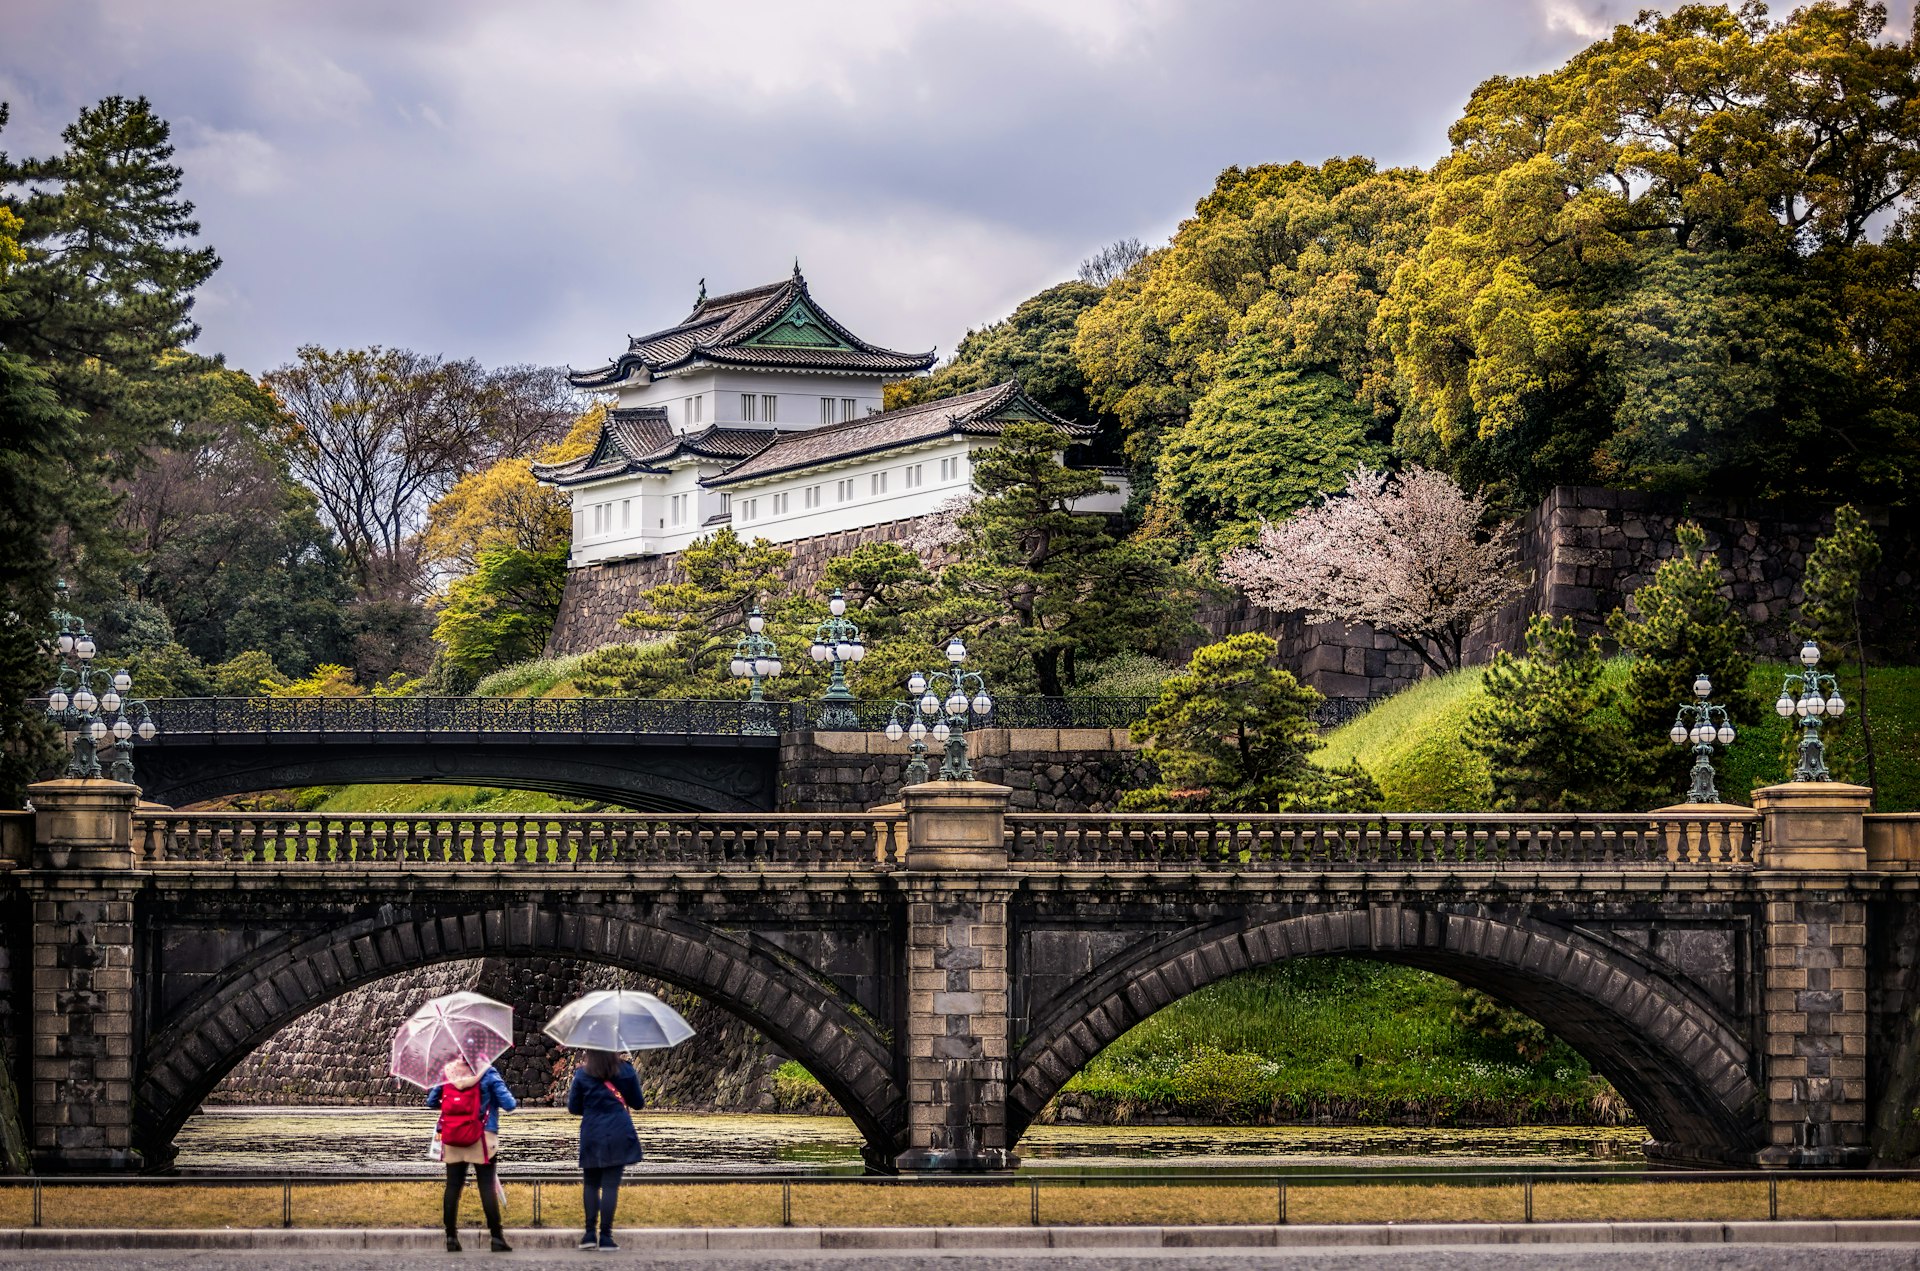 Two women stood beneath umbrellas stand in front of a bridge at the Imperial Palace in Tokyo